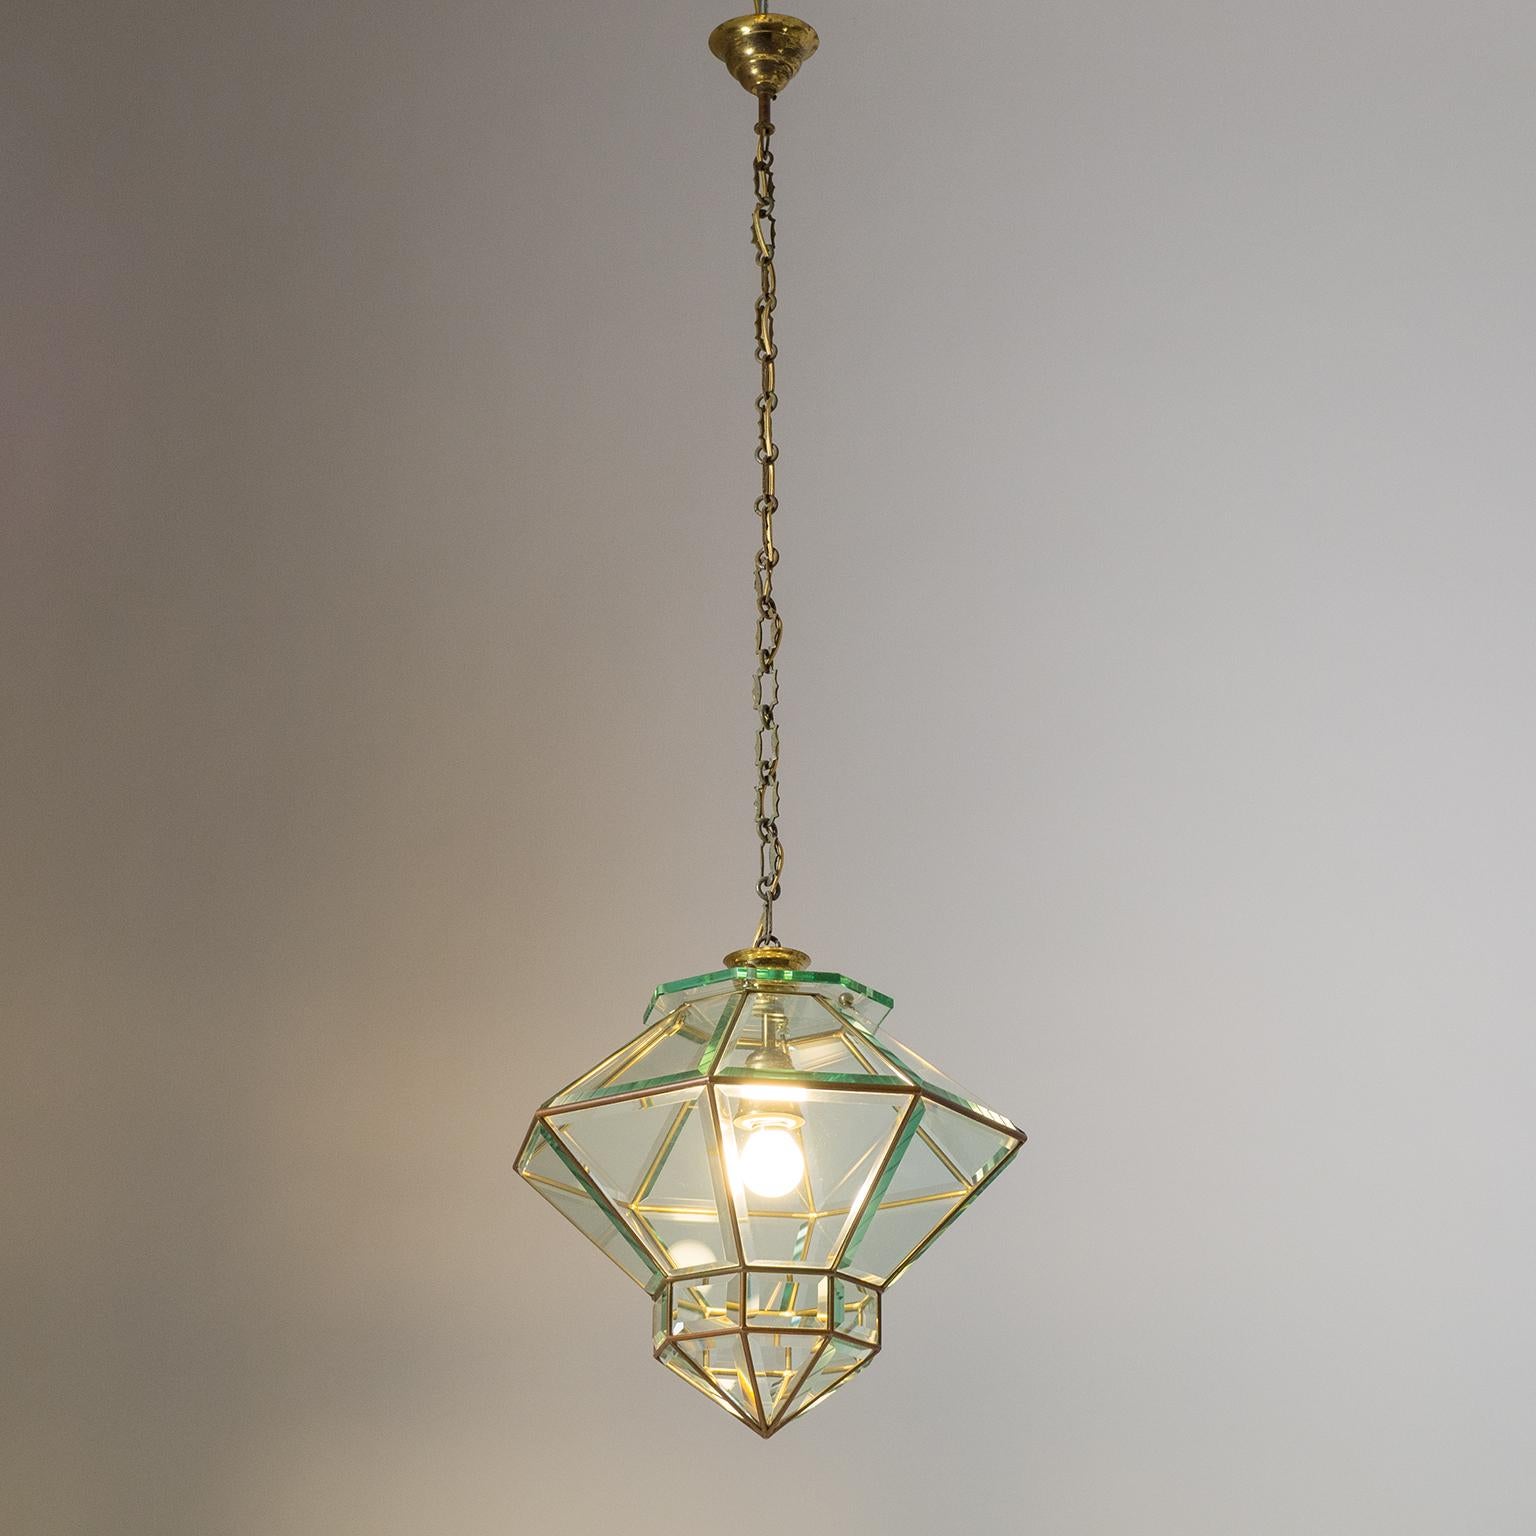 Italian 1940s Lantern, Faceted Glass and Brass 12